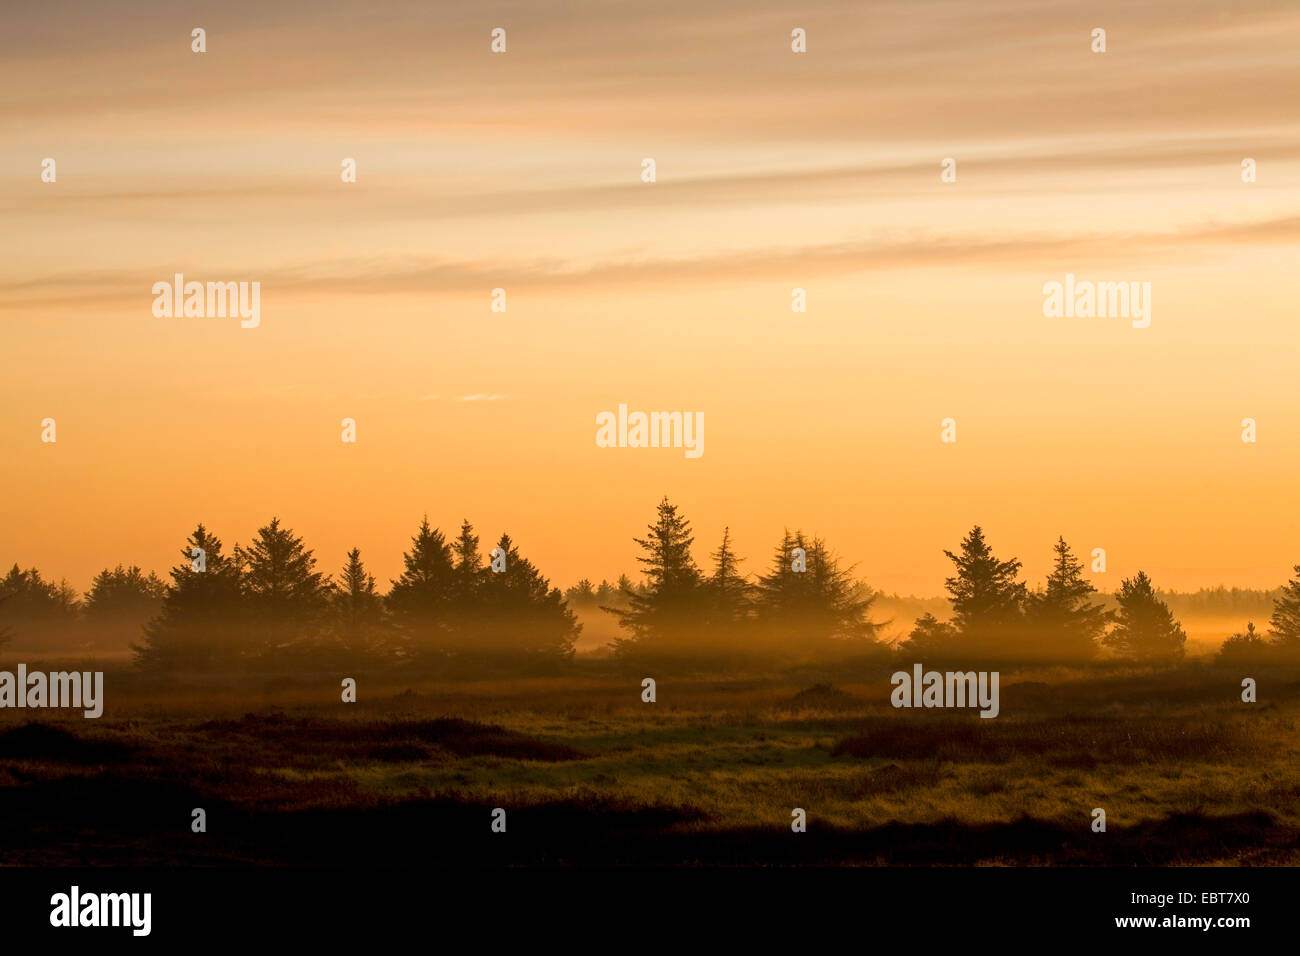 Norway spruce (Picea abies), Norway spruces in morning light, Denmark, Midtjylland, Jylland Stock Photo